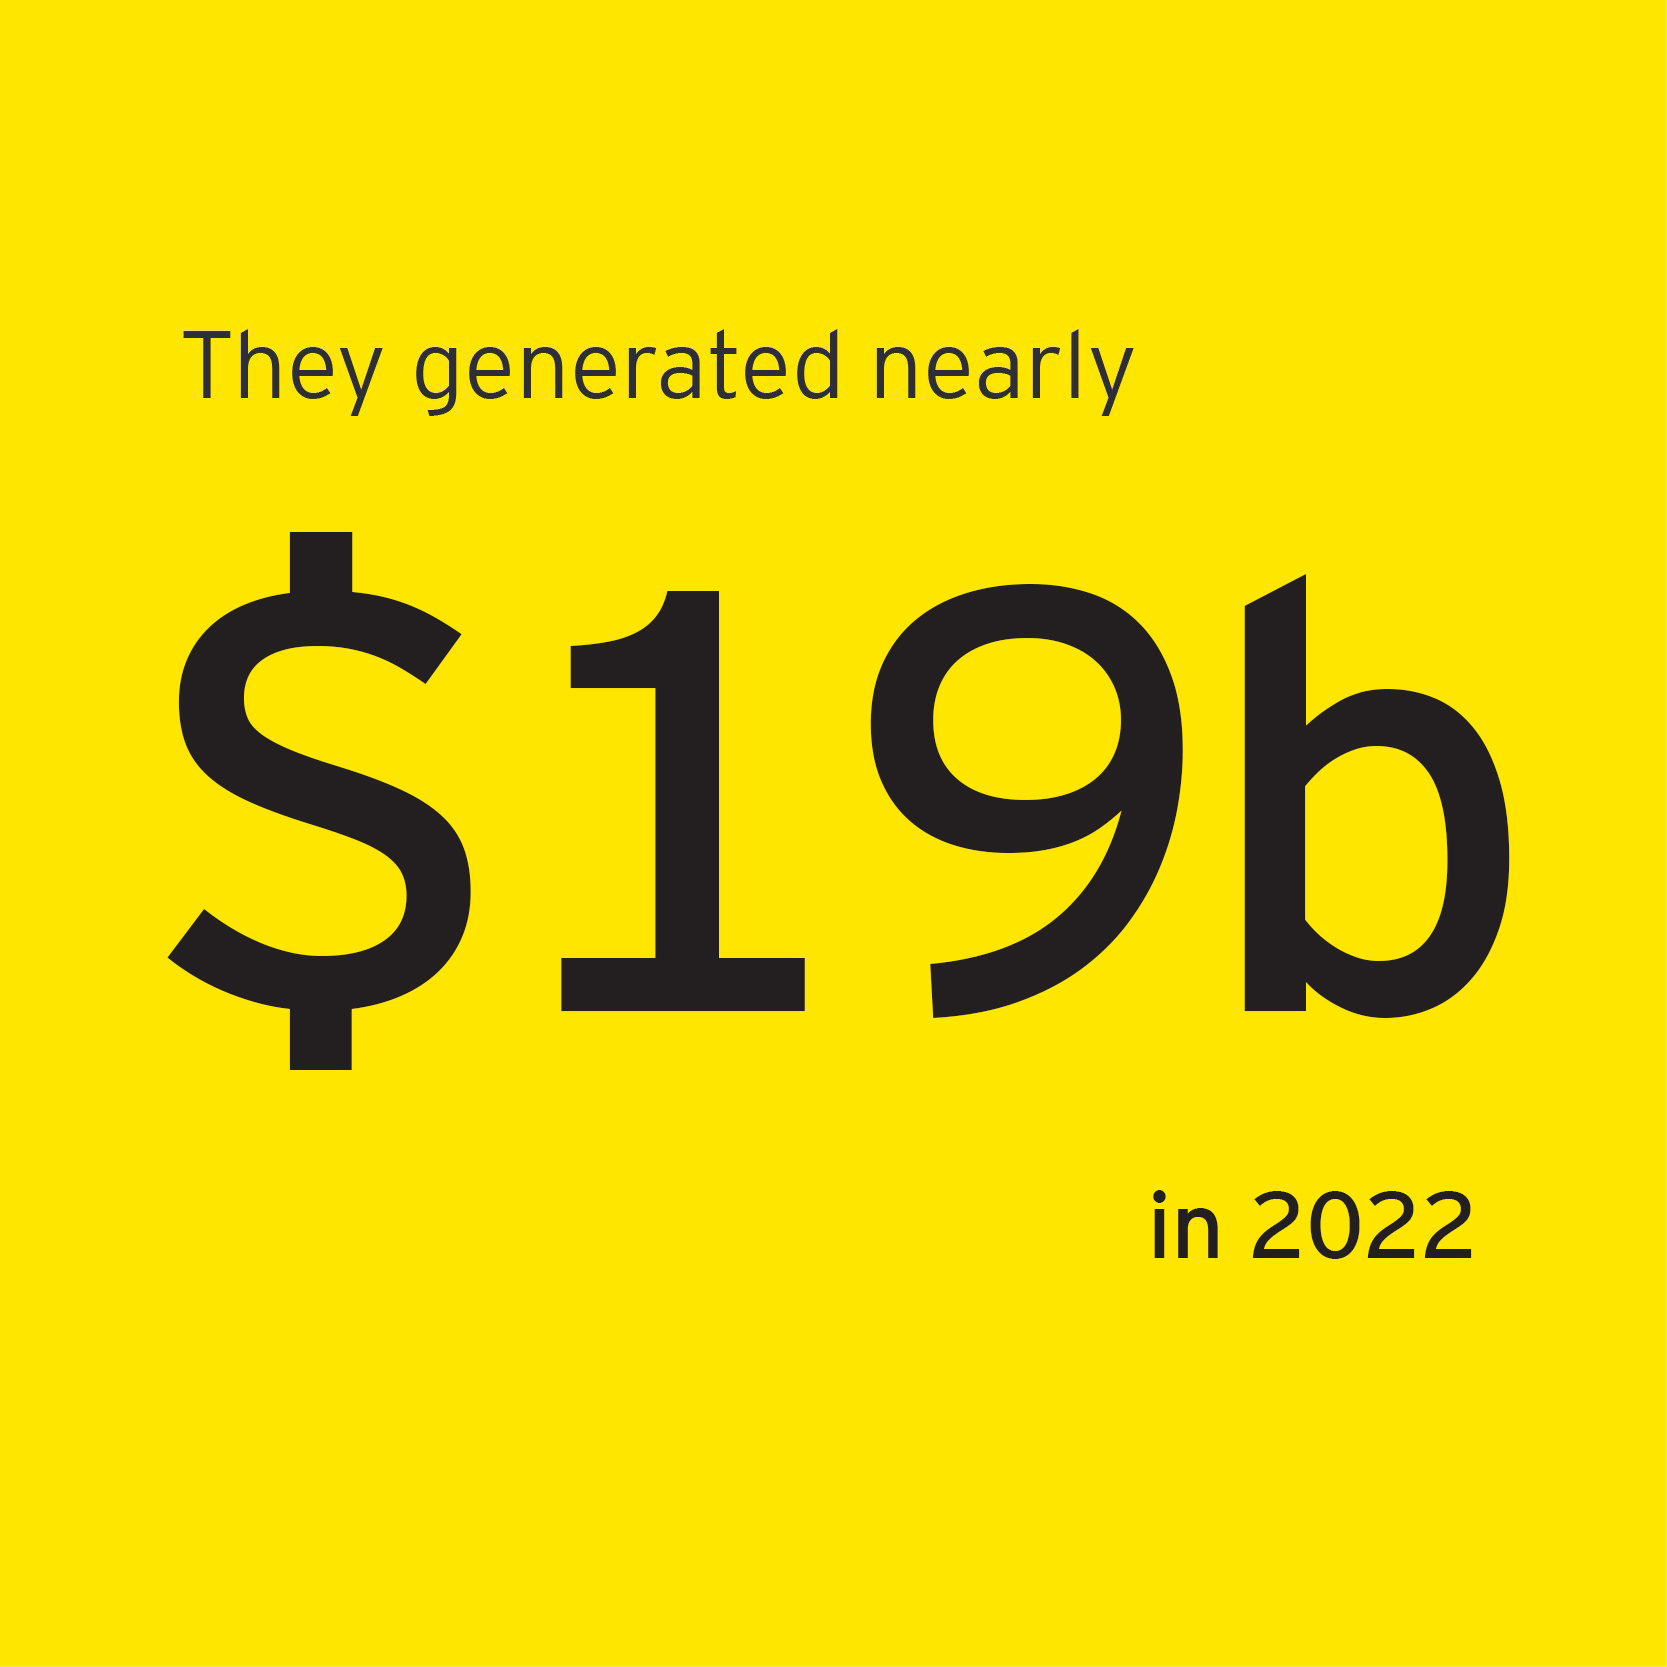 Nearly $19b in revenue generated by EOY Central South finalists in 2022